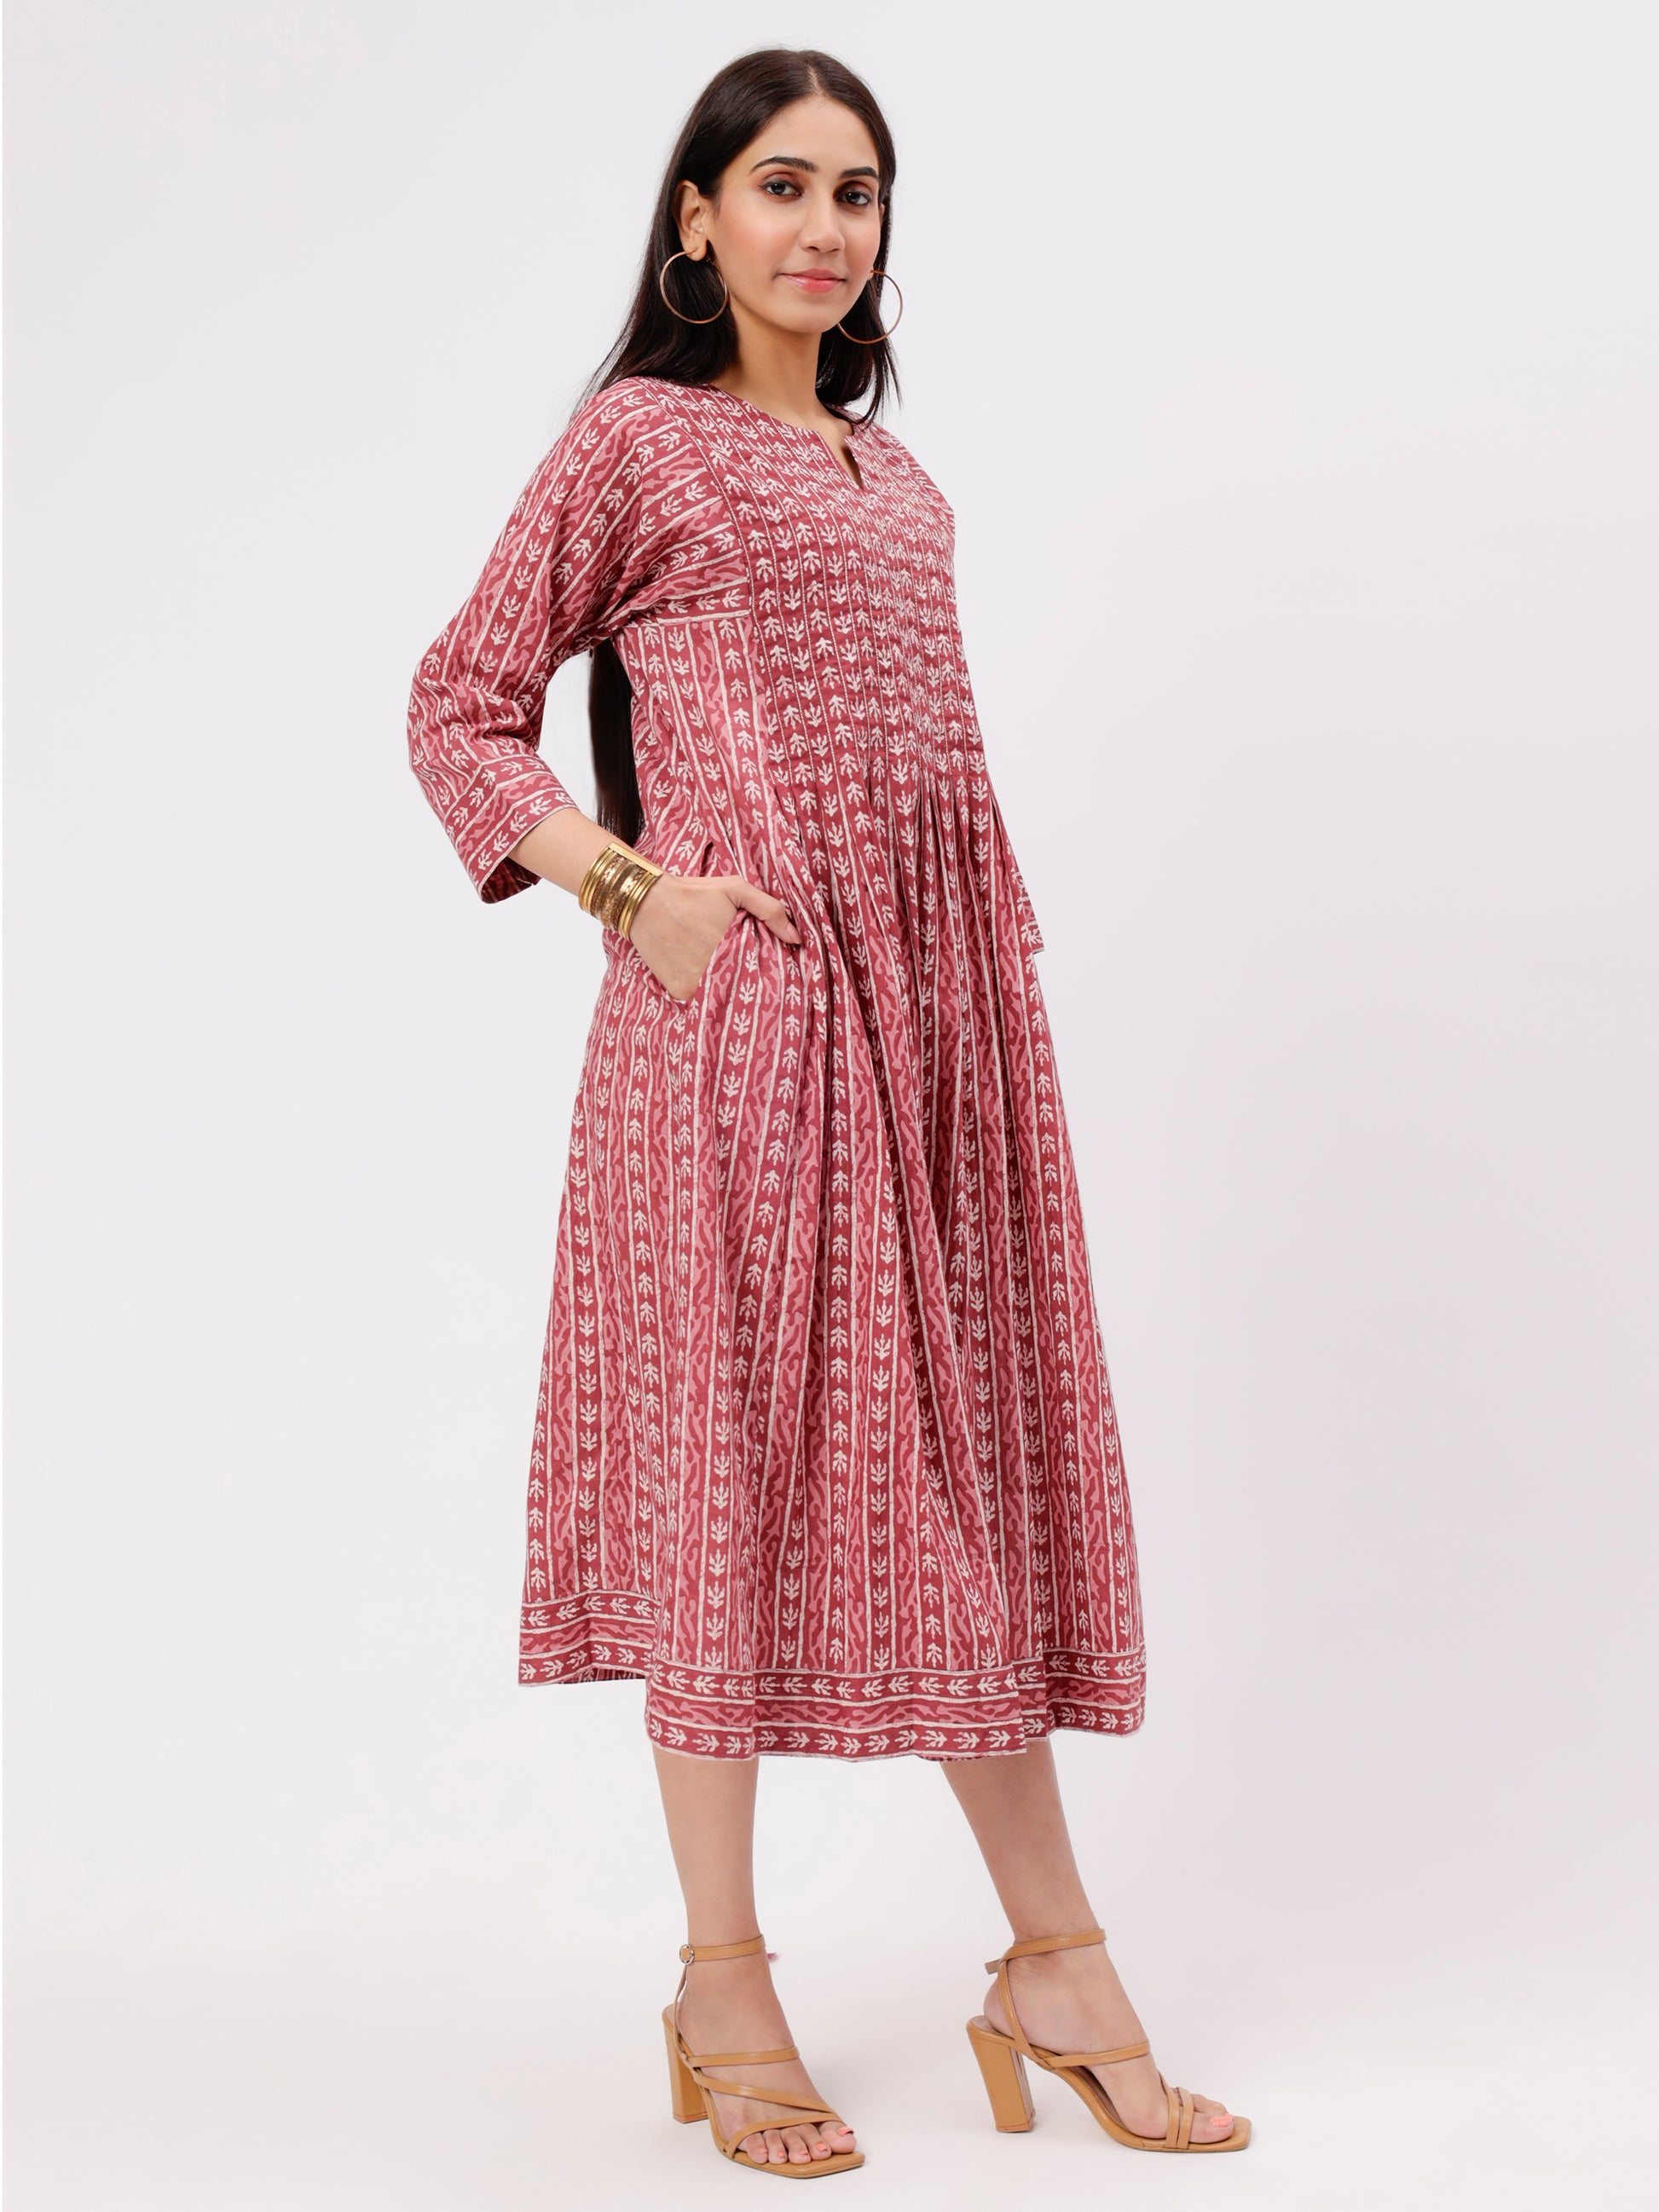 Chestnut Colored Printed Calf Length Pleated Dress in Soft cotton